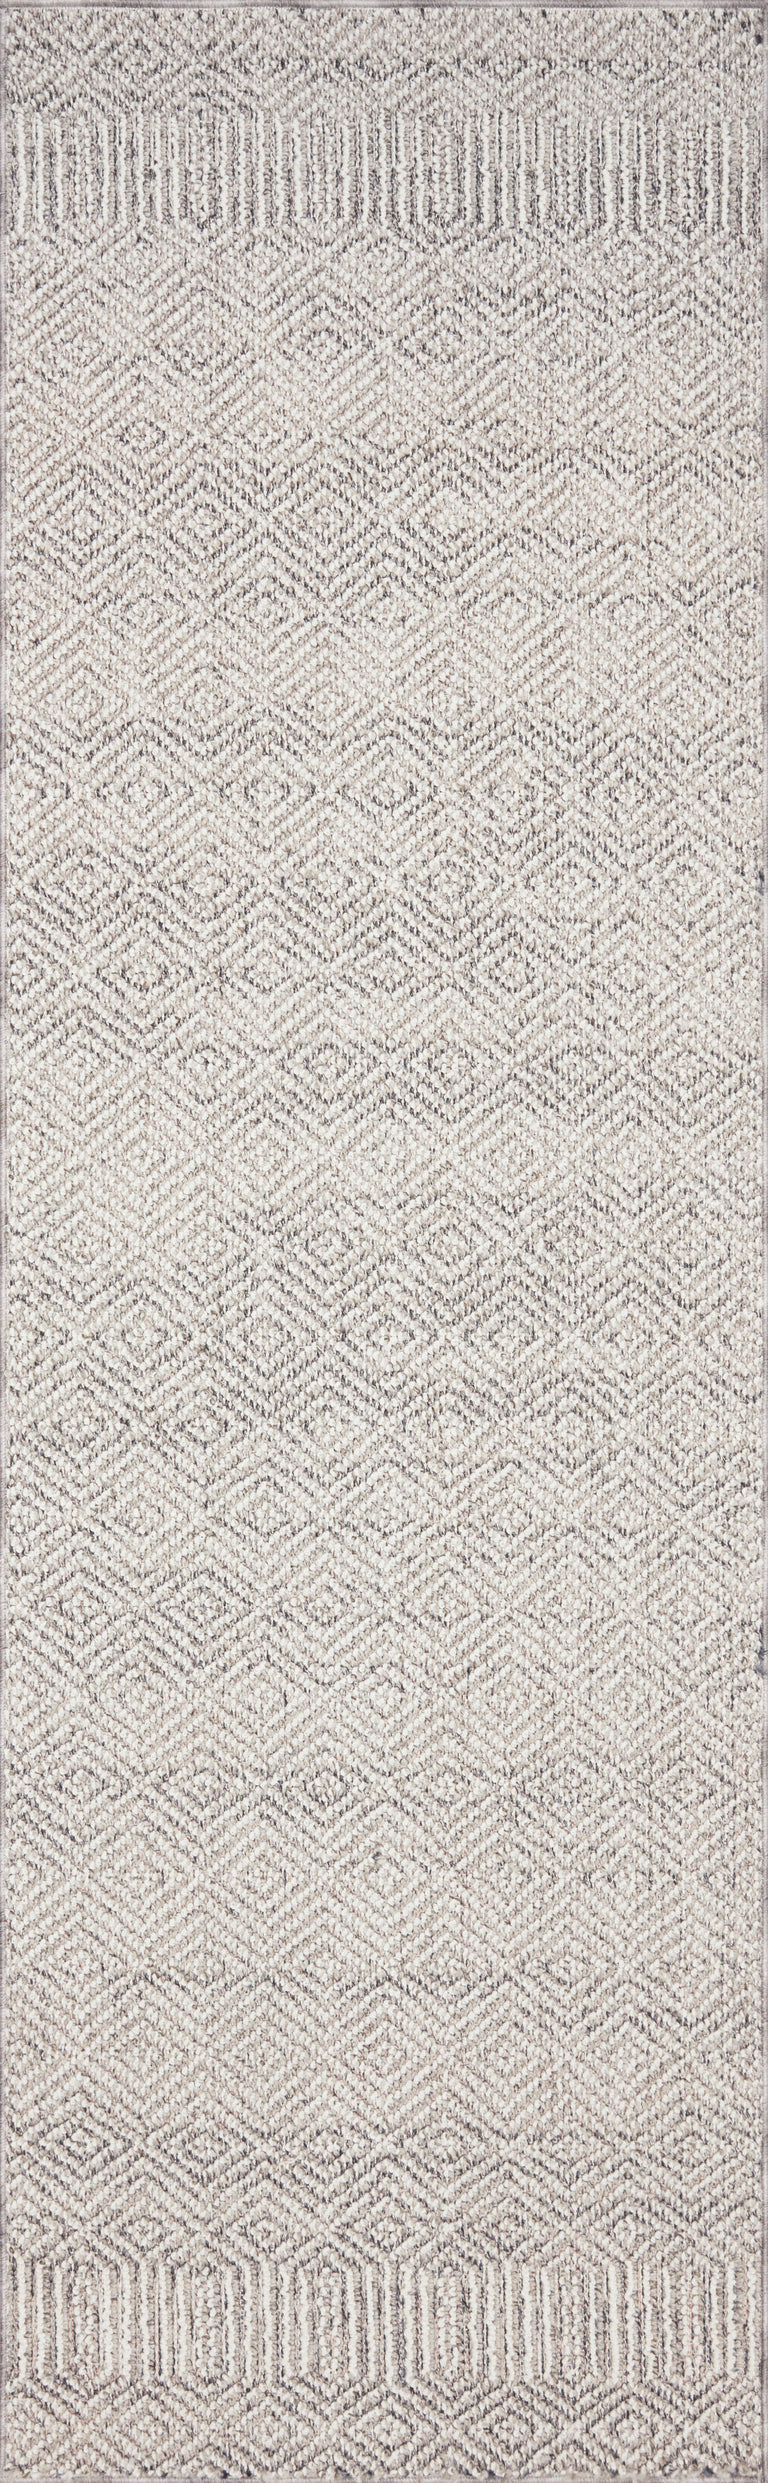 Loloi Rugs Cole Collection Rug in Grey, Bone - 7'10" x 10'1"